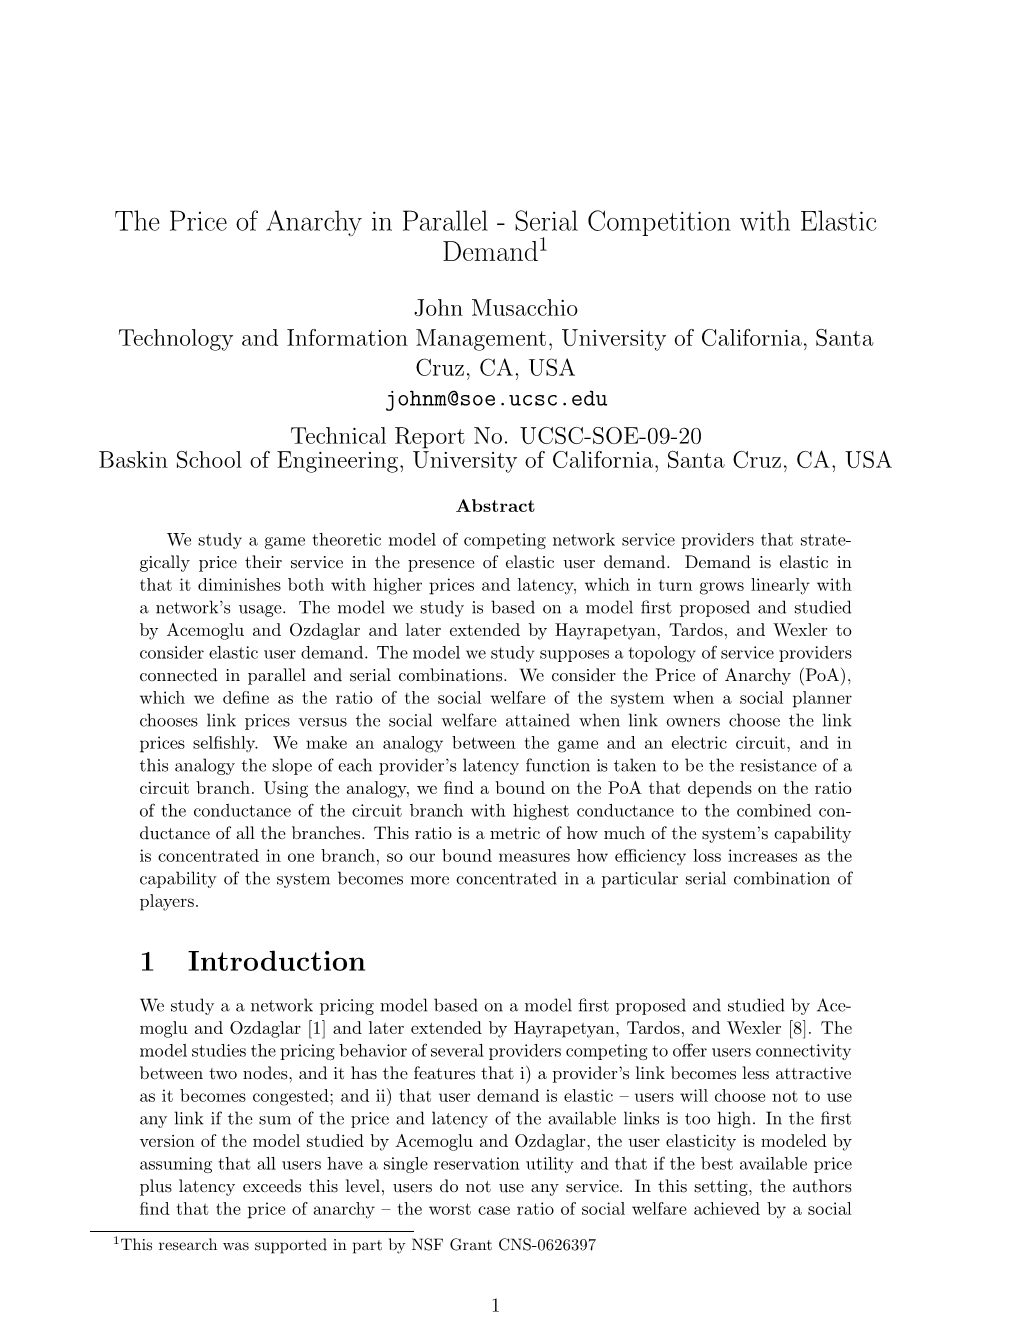 The Price of Anarchy in Parallel - Serial Competition with Elastic Demand1